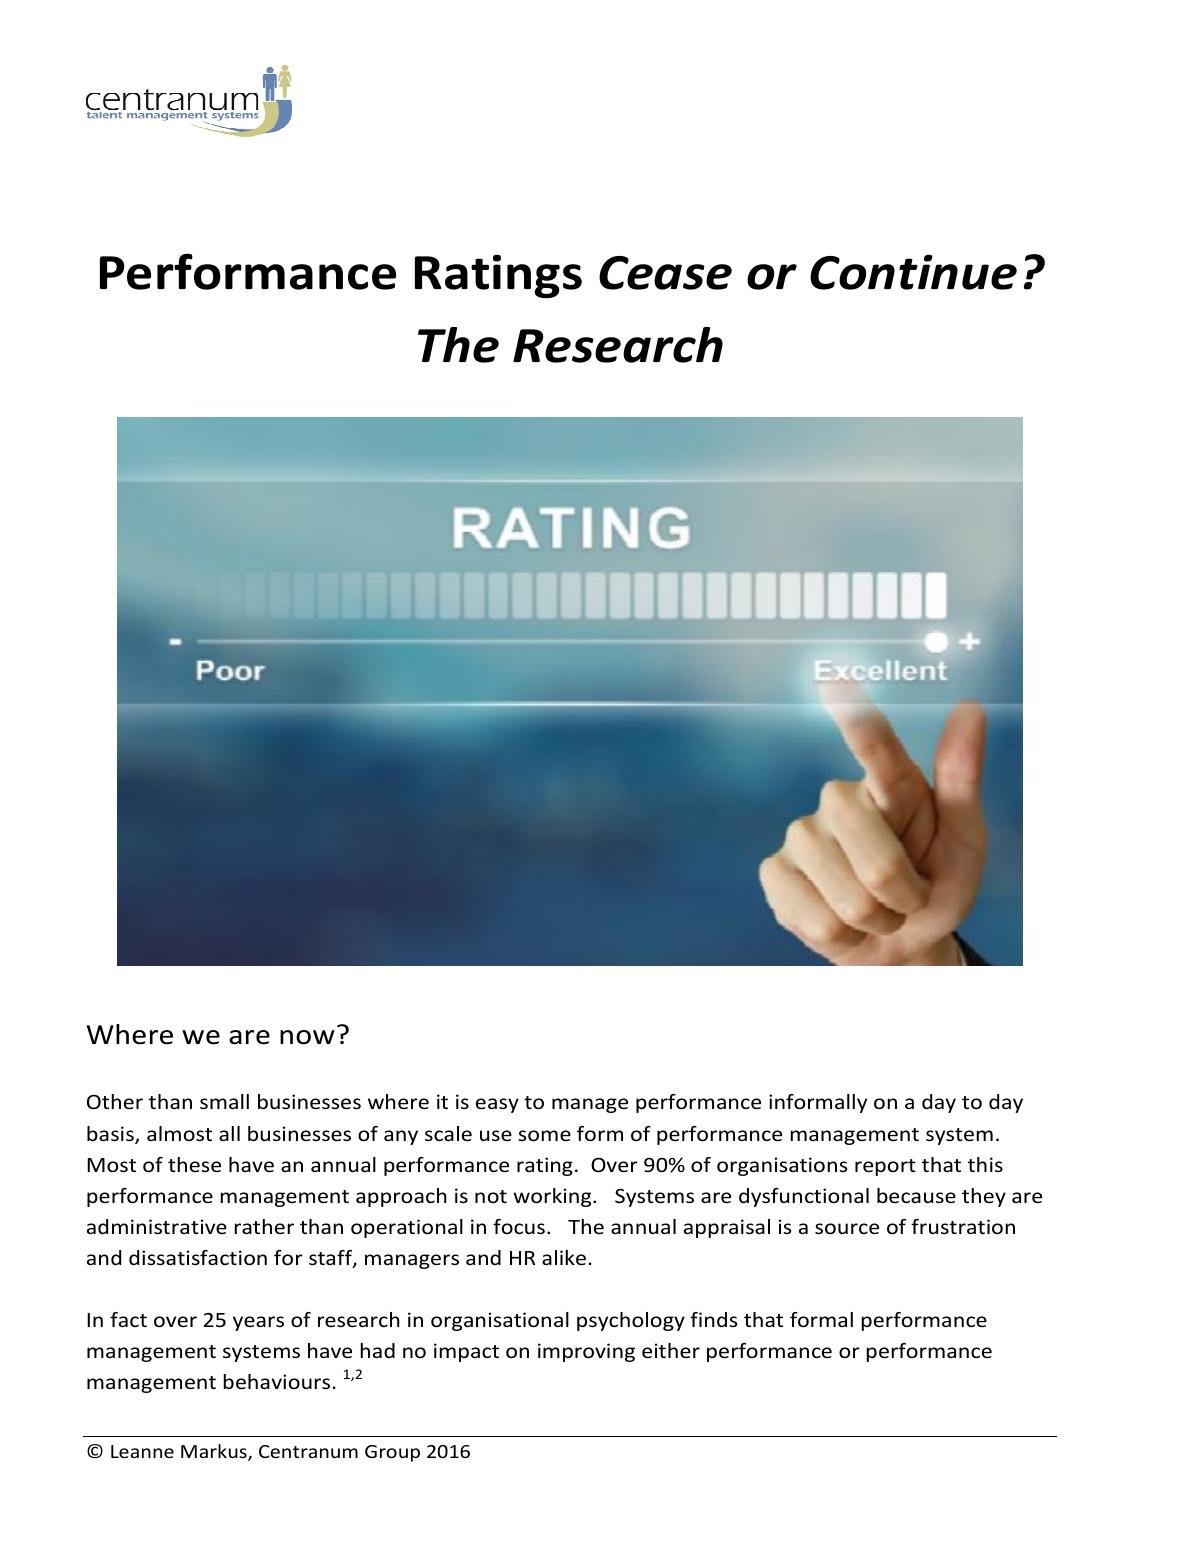 Performance Ratings - To Use or Not?